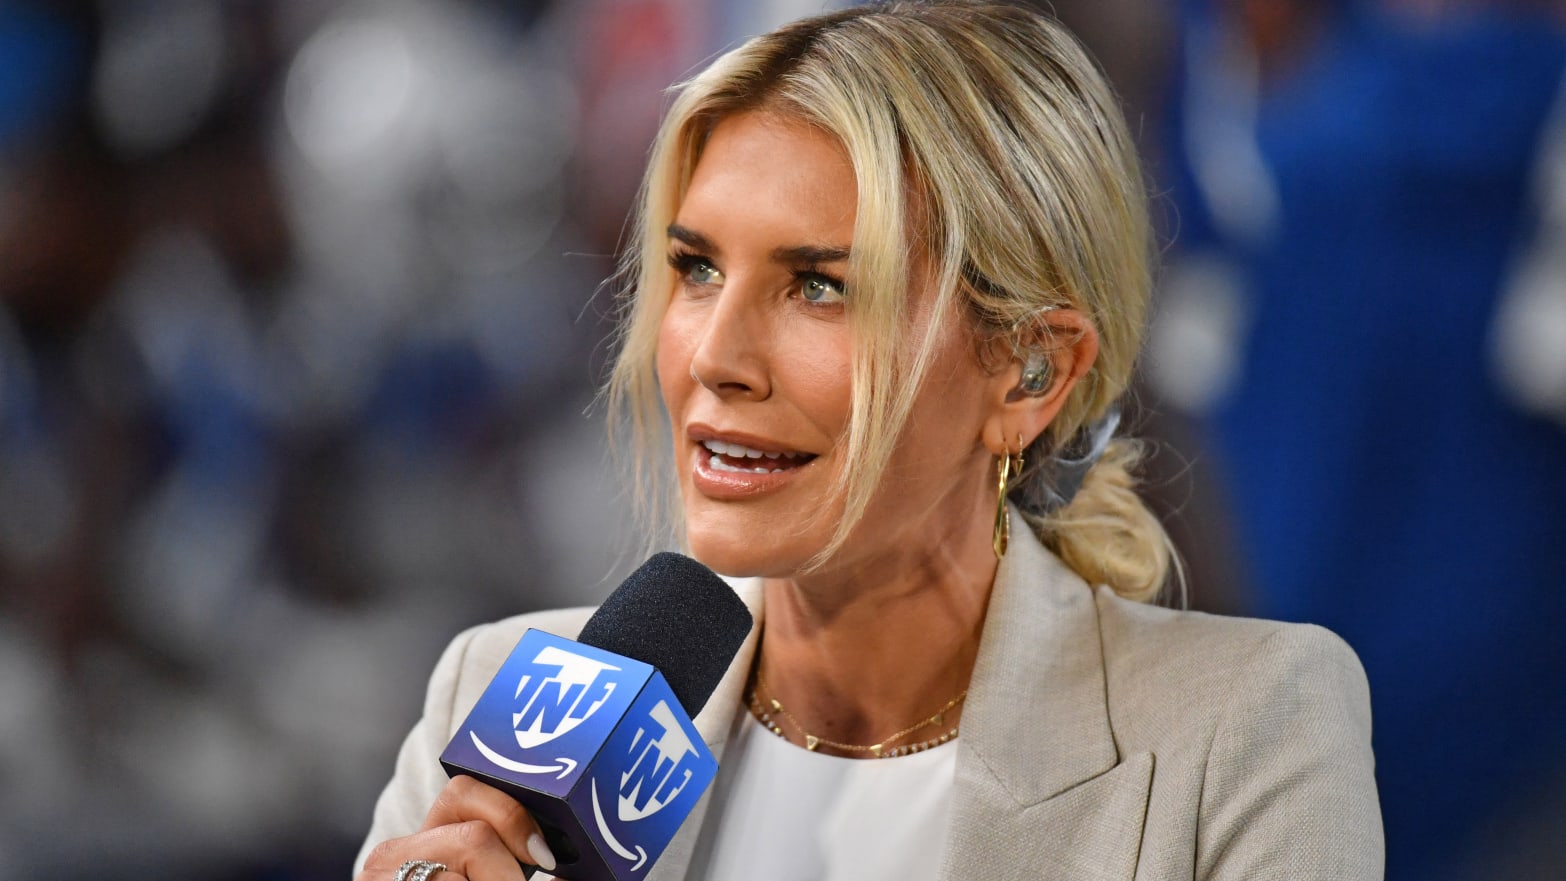 Charissa Thompson, holding a microphone, speaks during a broadcast of Prime Video’s Thursday Night Football.